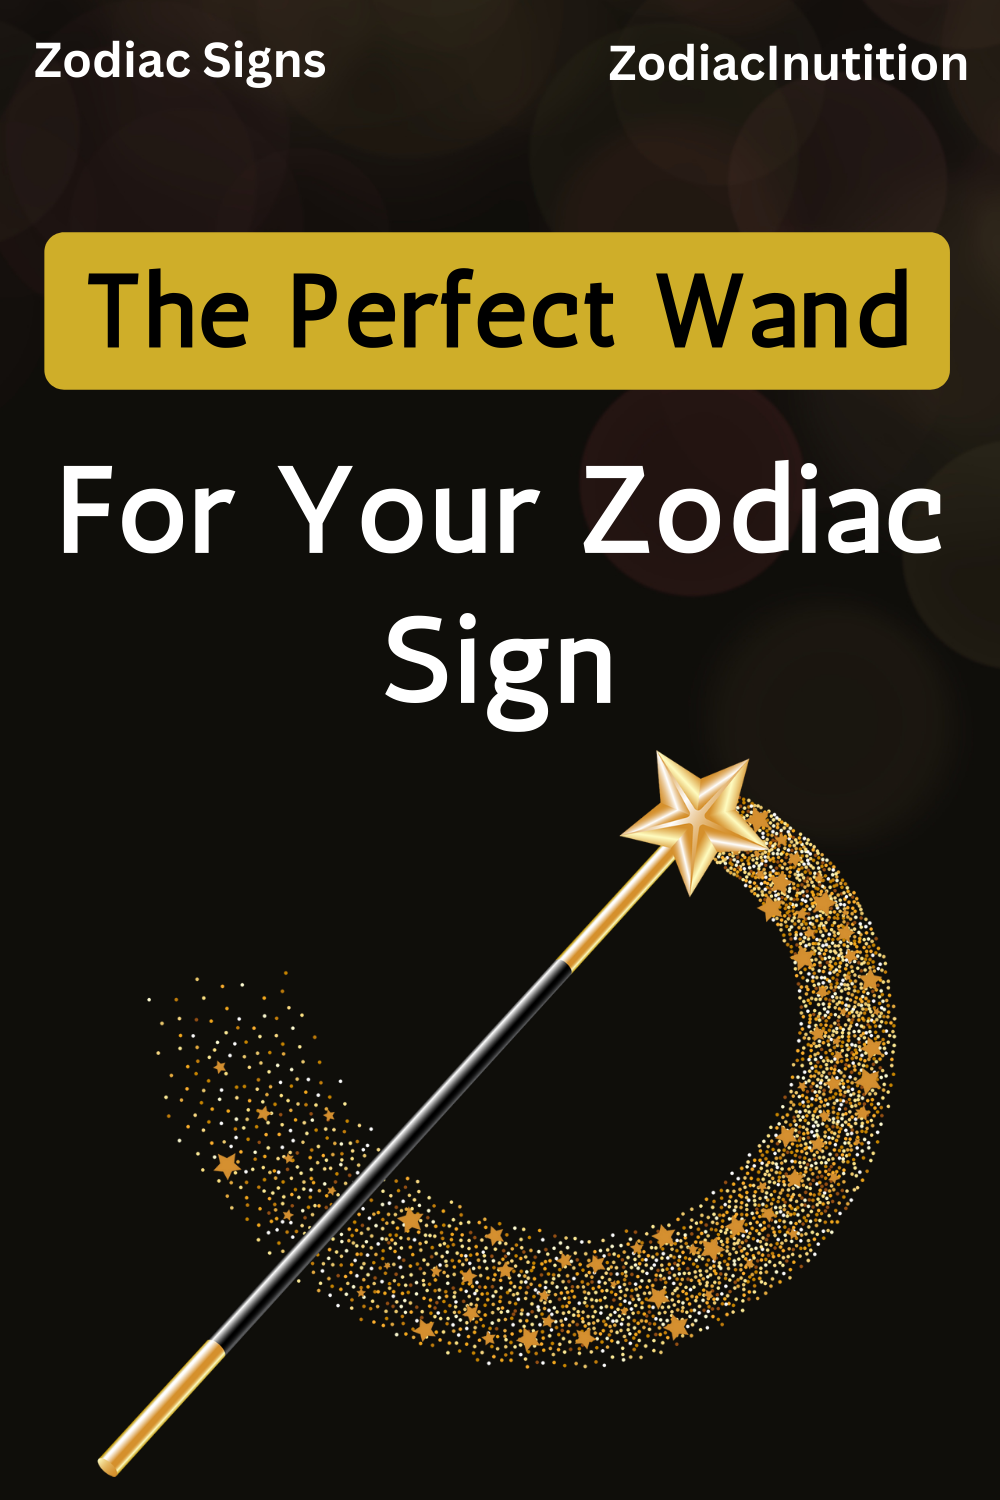 The Perfect Wand For Your Zodiac Sign